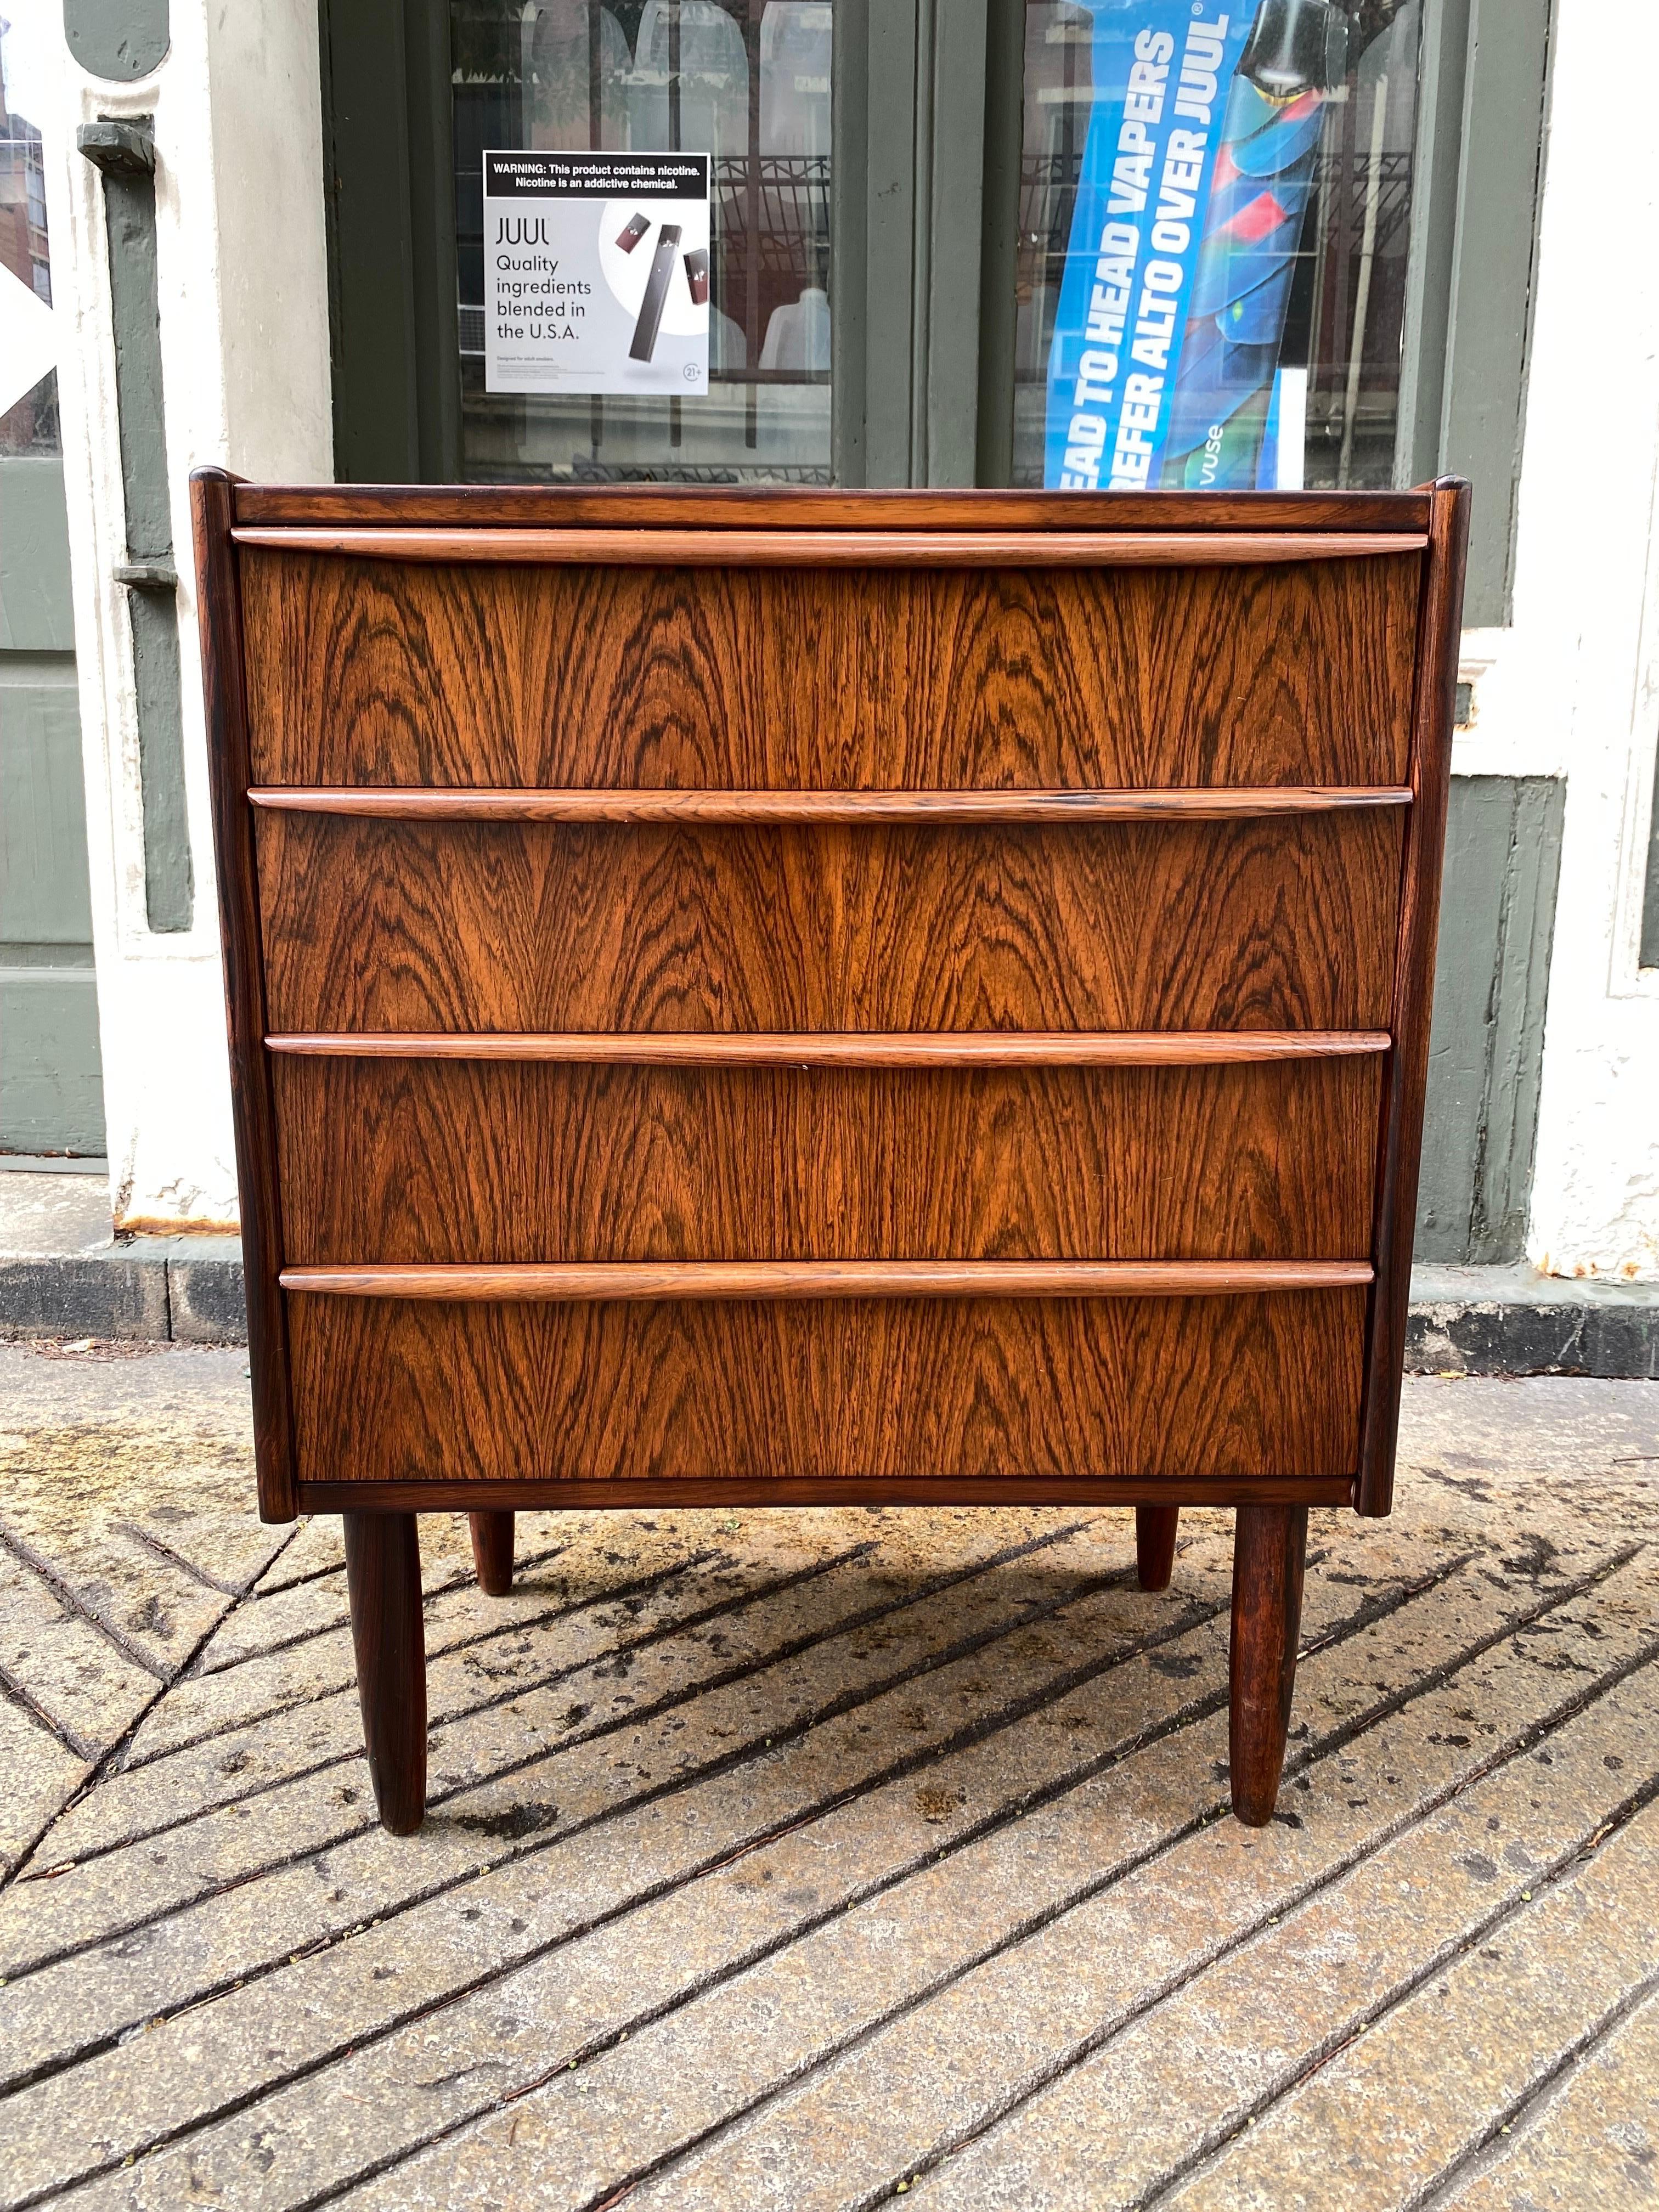 Small Rosewood 4 Drawer Dresser.  Beautiful veneer with curved wood handles.  Simple straight forward look!  Danish Made, legs unscrew for easy moving!  Looks like top was refinished within last 10 years.  Overall looks good!  One drawer handle has